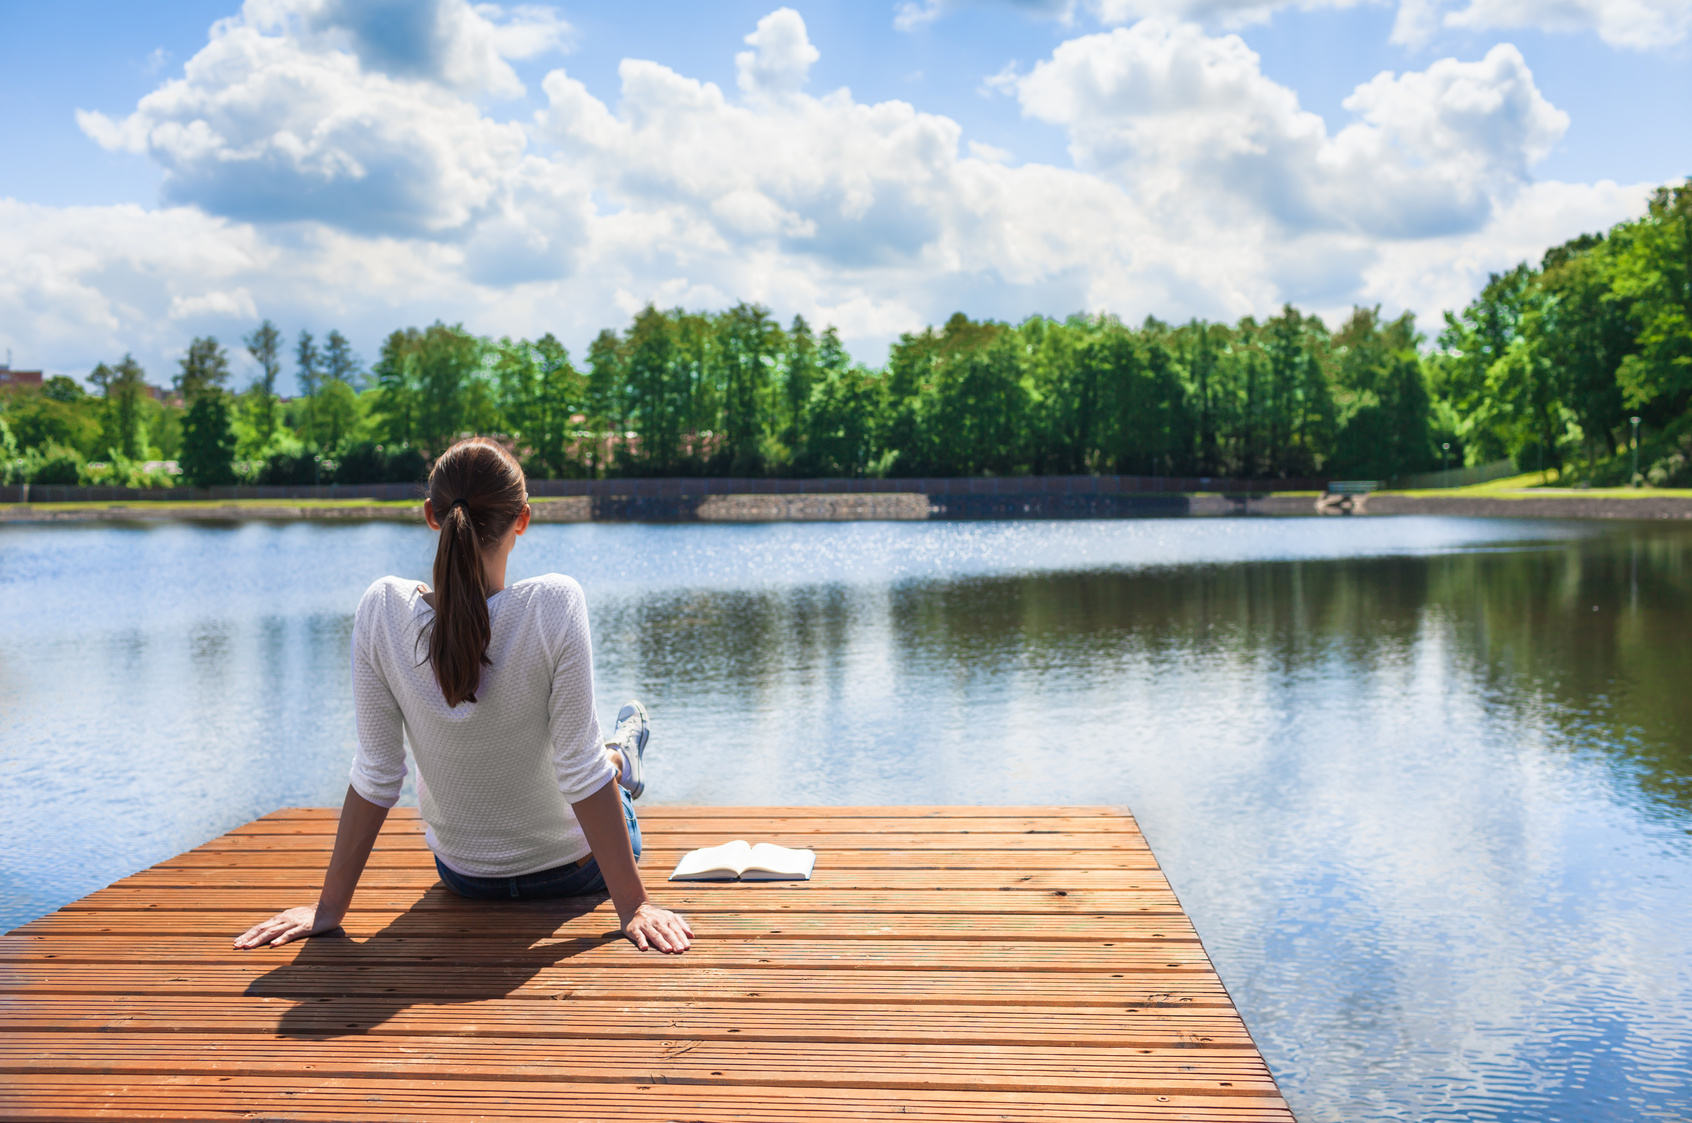 Woman prioritizing herself by relaxing by the lake